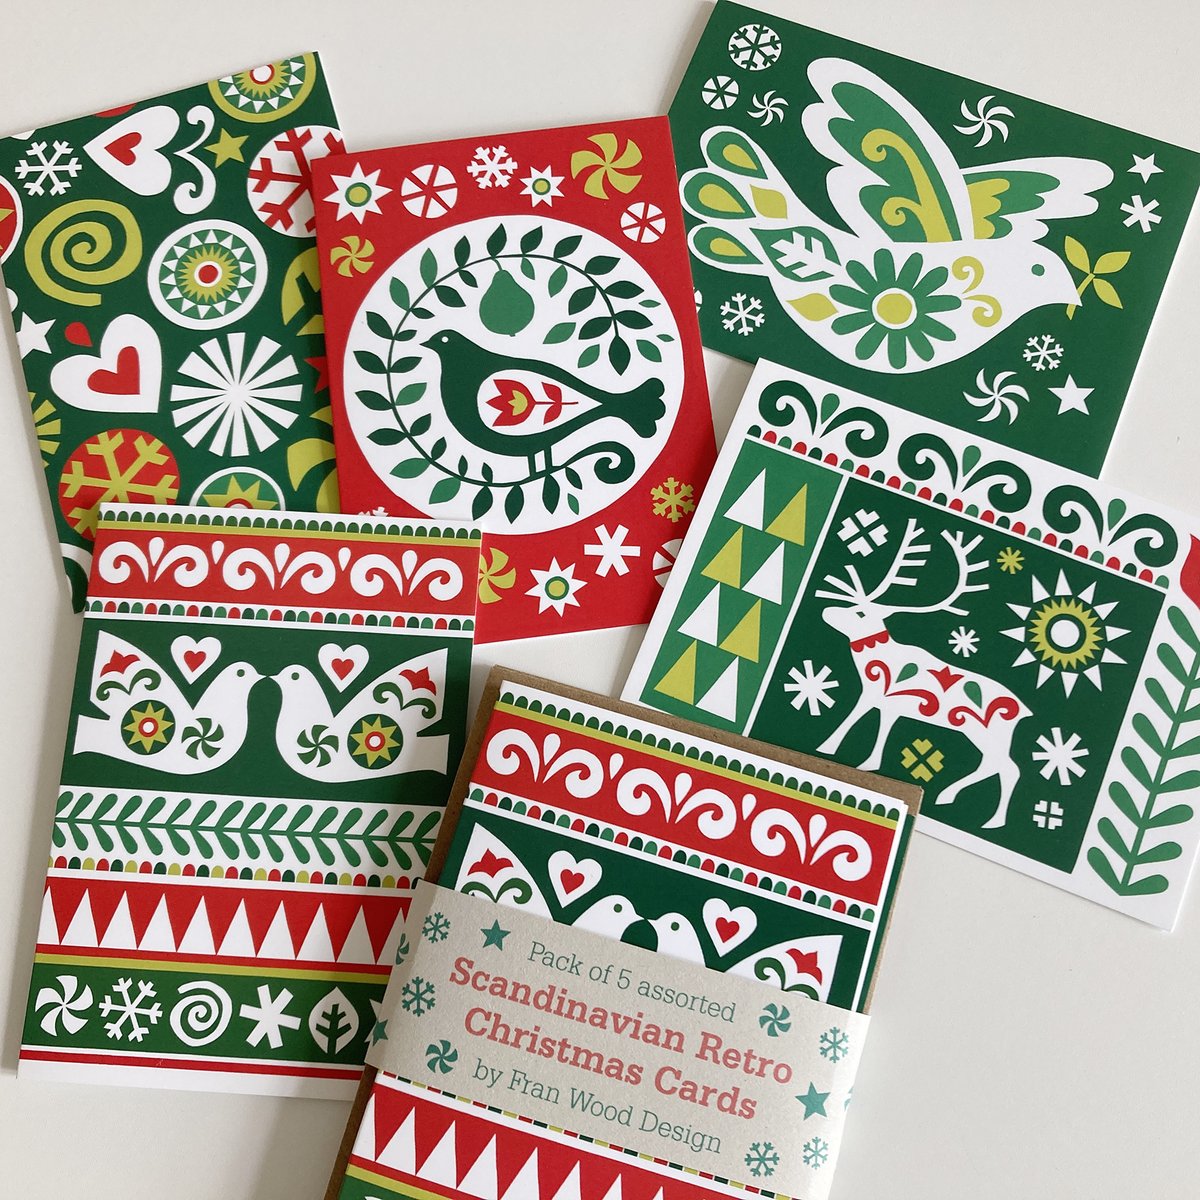 My Christmas cards are all 20% off until the end of September. These Scandinavian retro folk art inspired cards come as a pack of 5 various designs. Find my online shop here: shorturl.at/eivLM
#CWordSeptember #supportsmallbusiness #UKGiftHour